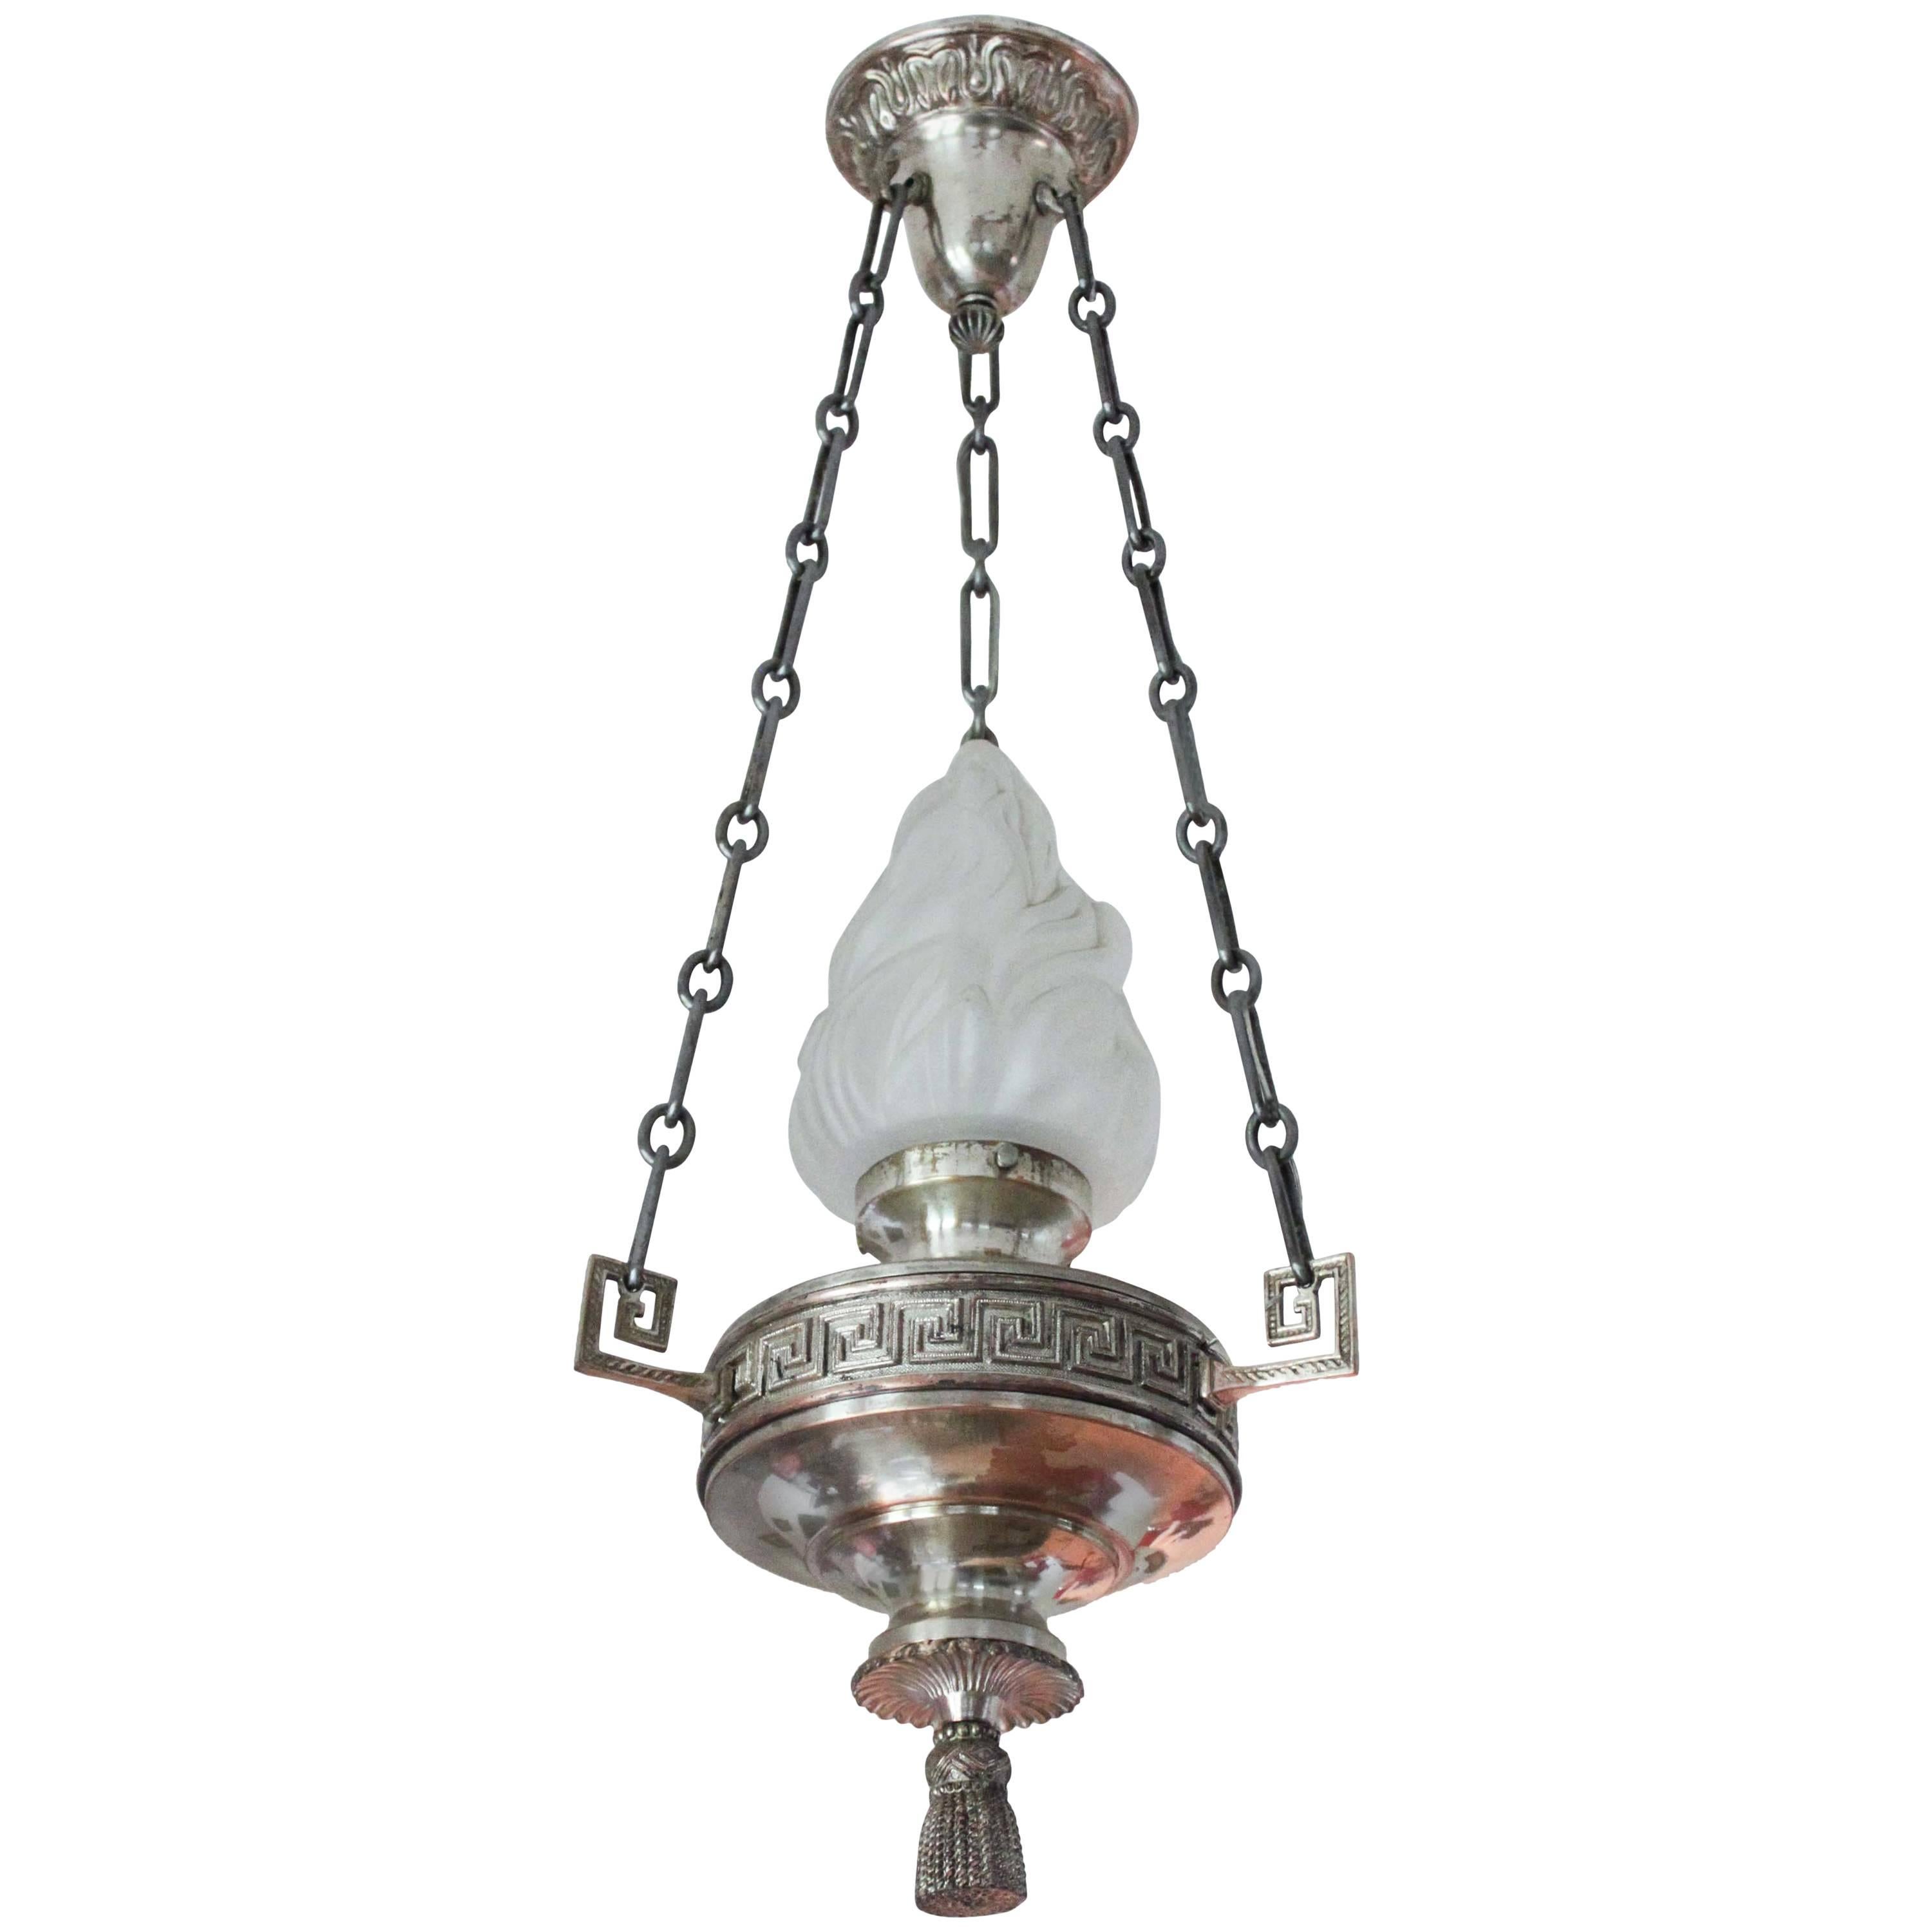 Antique Sanctuary Pendant Light with Flame Shade For Sale